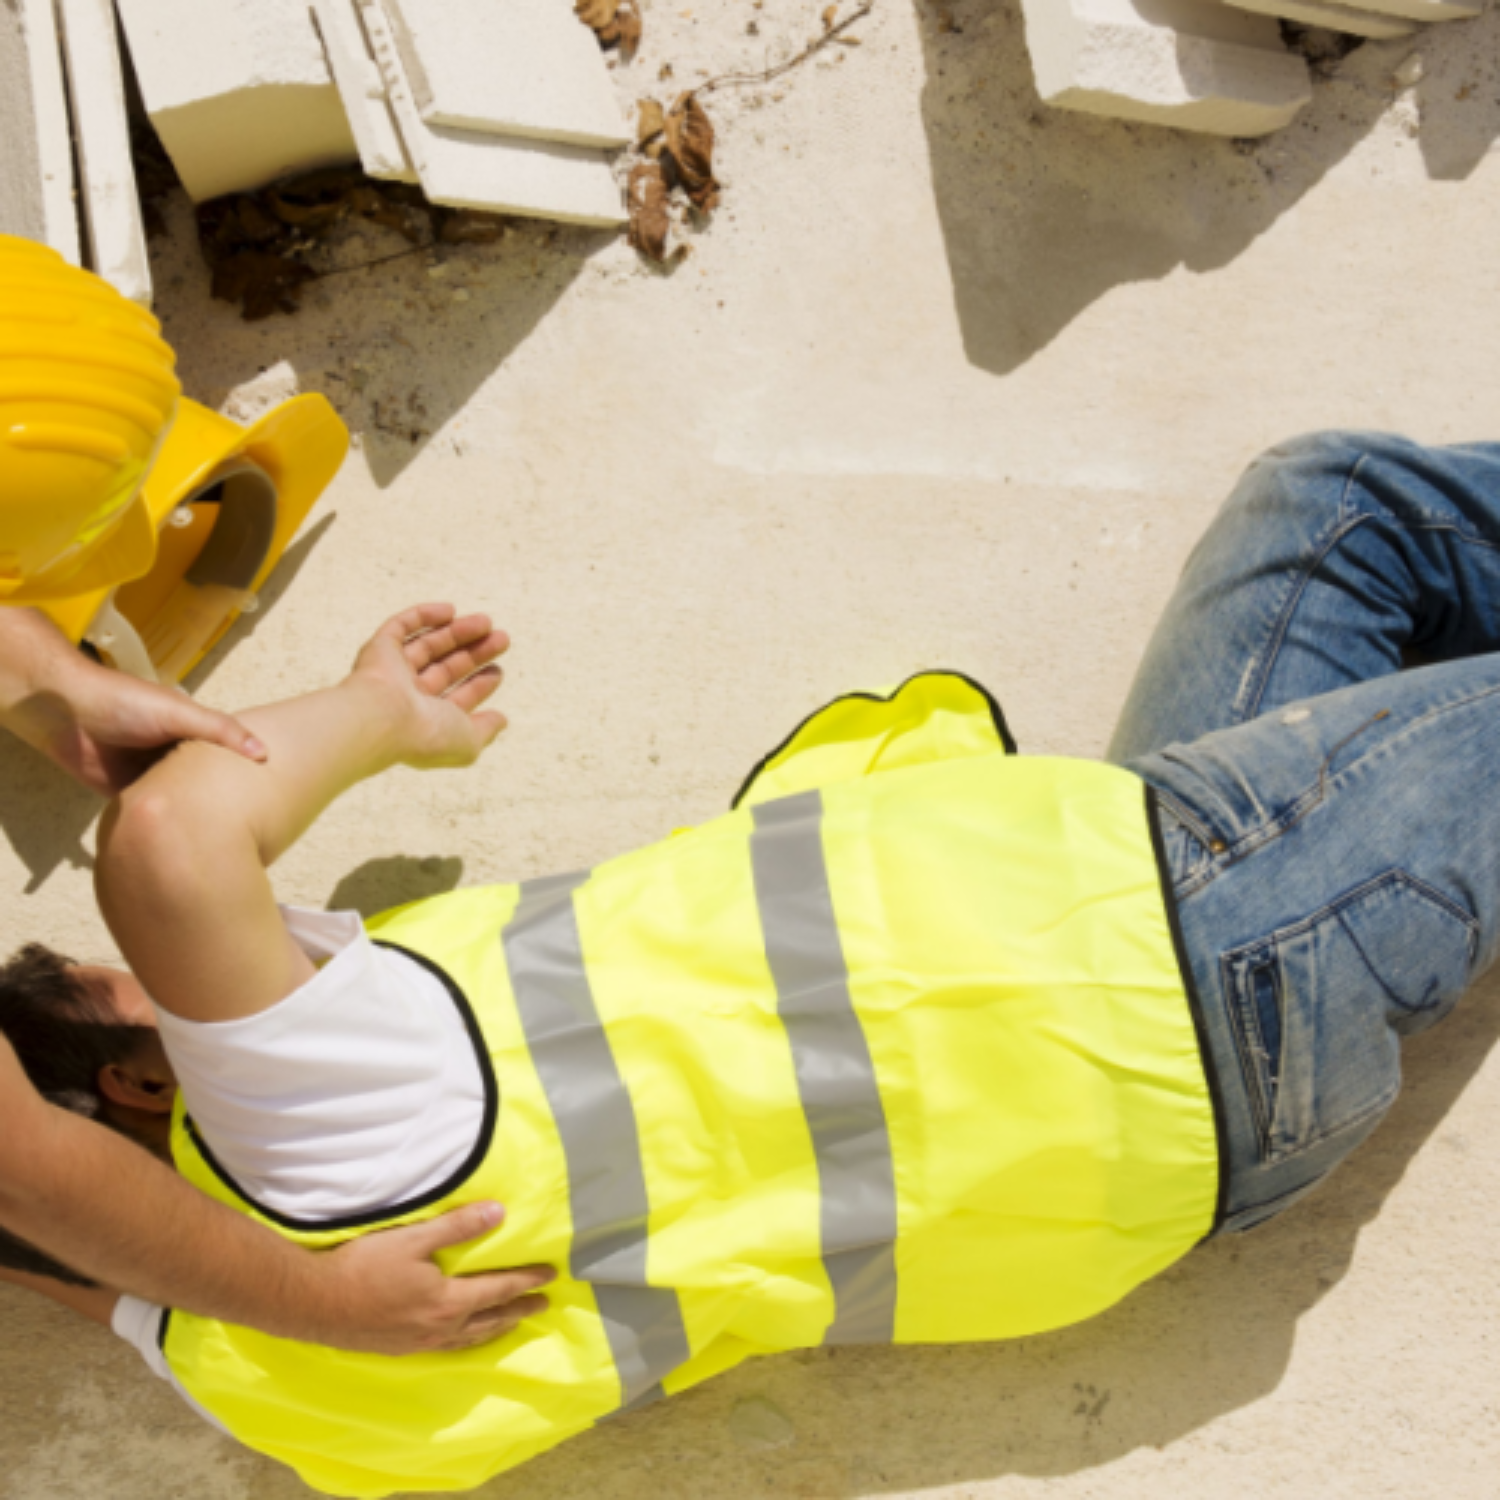 Workers Compensation Insurance California